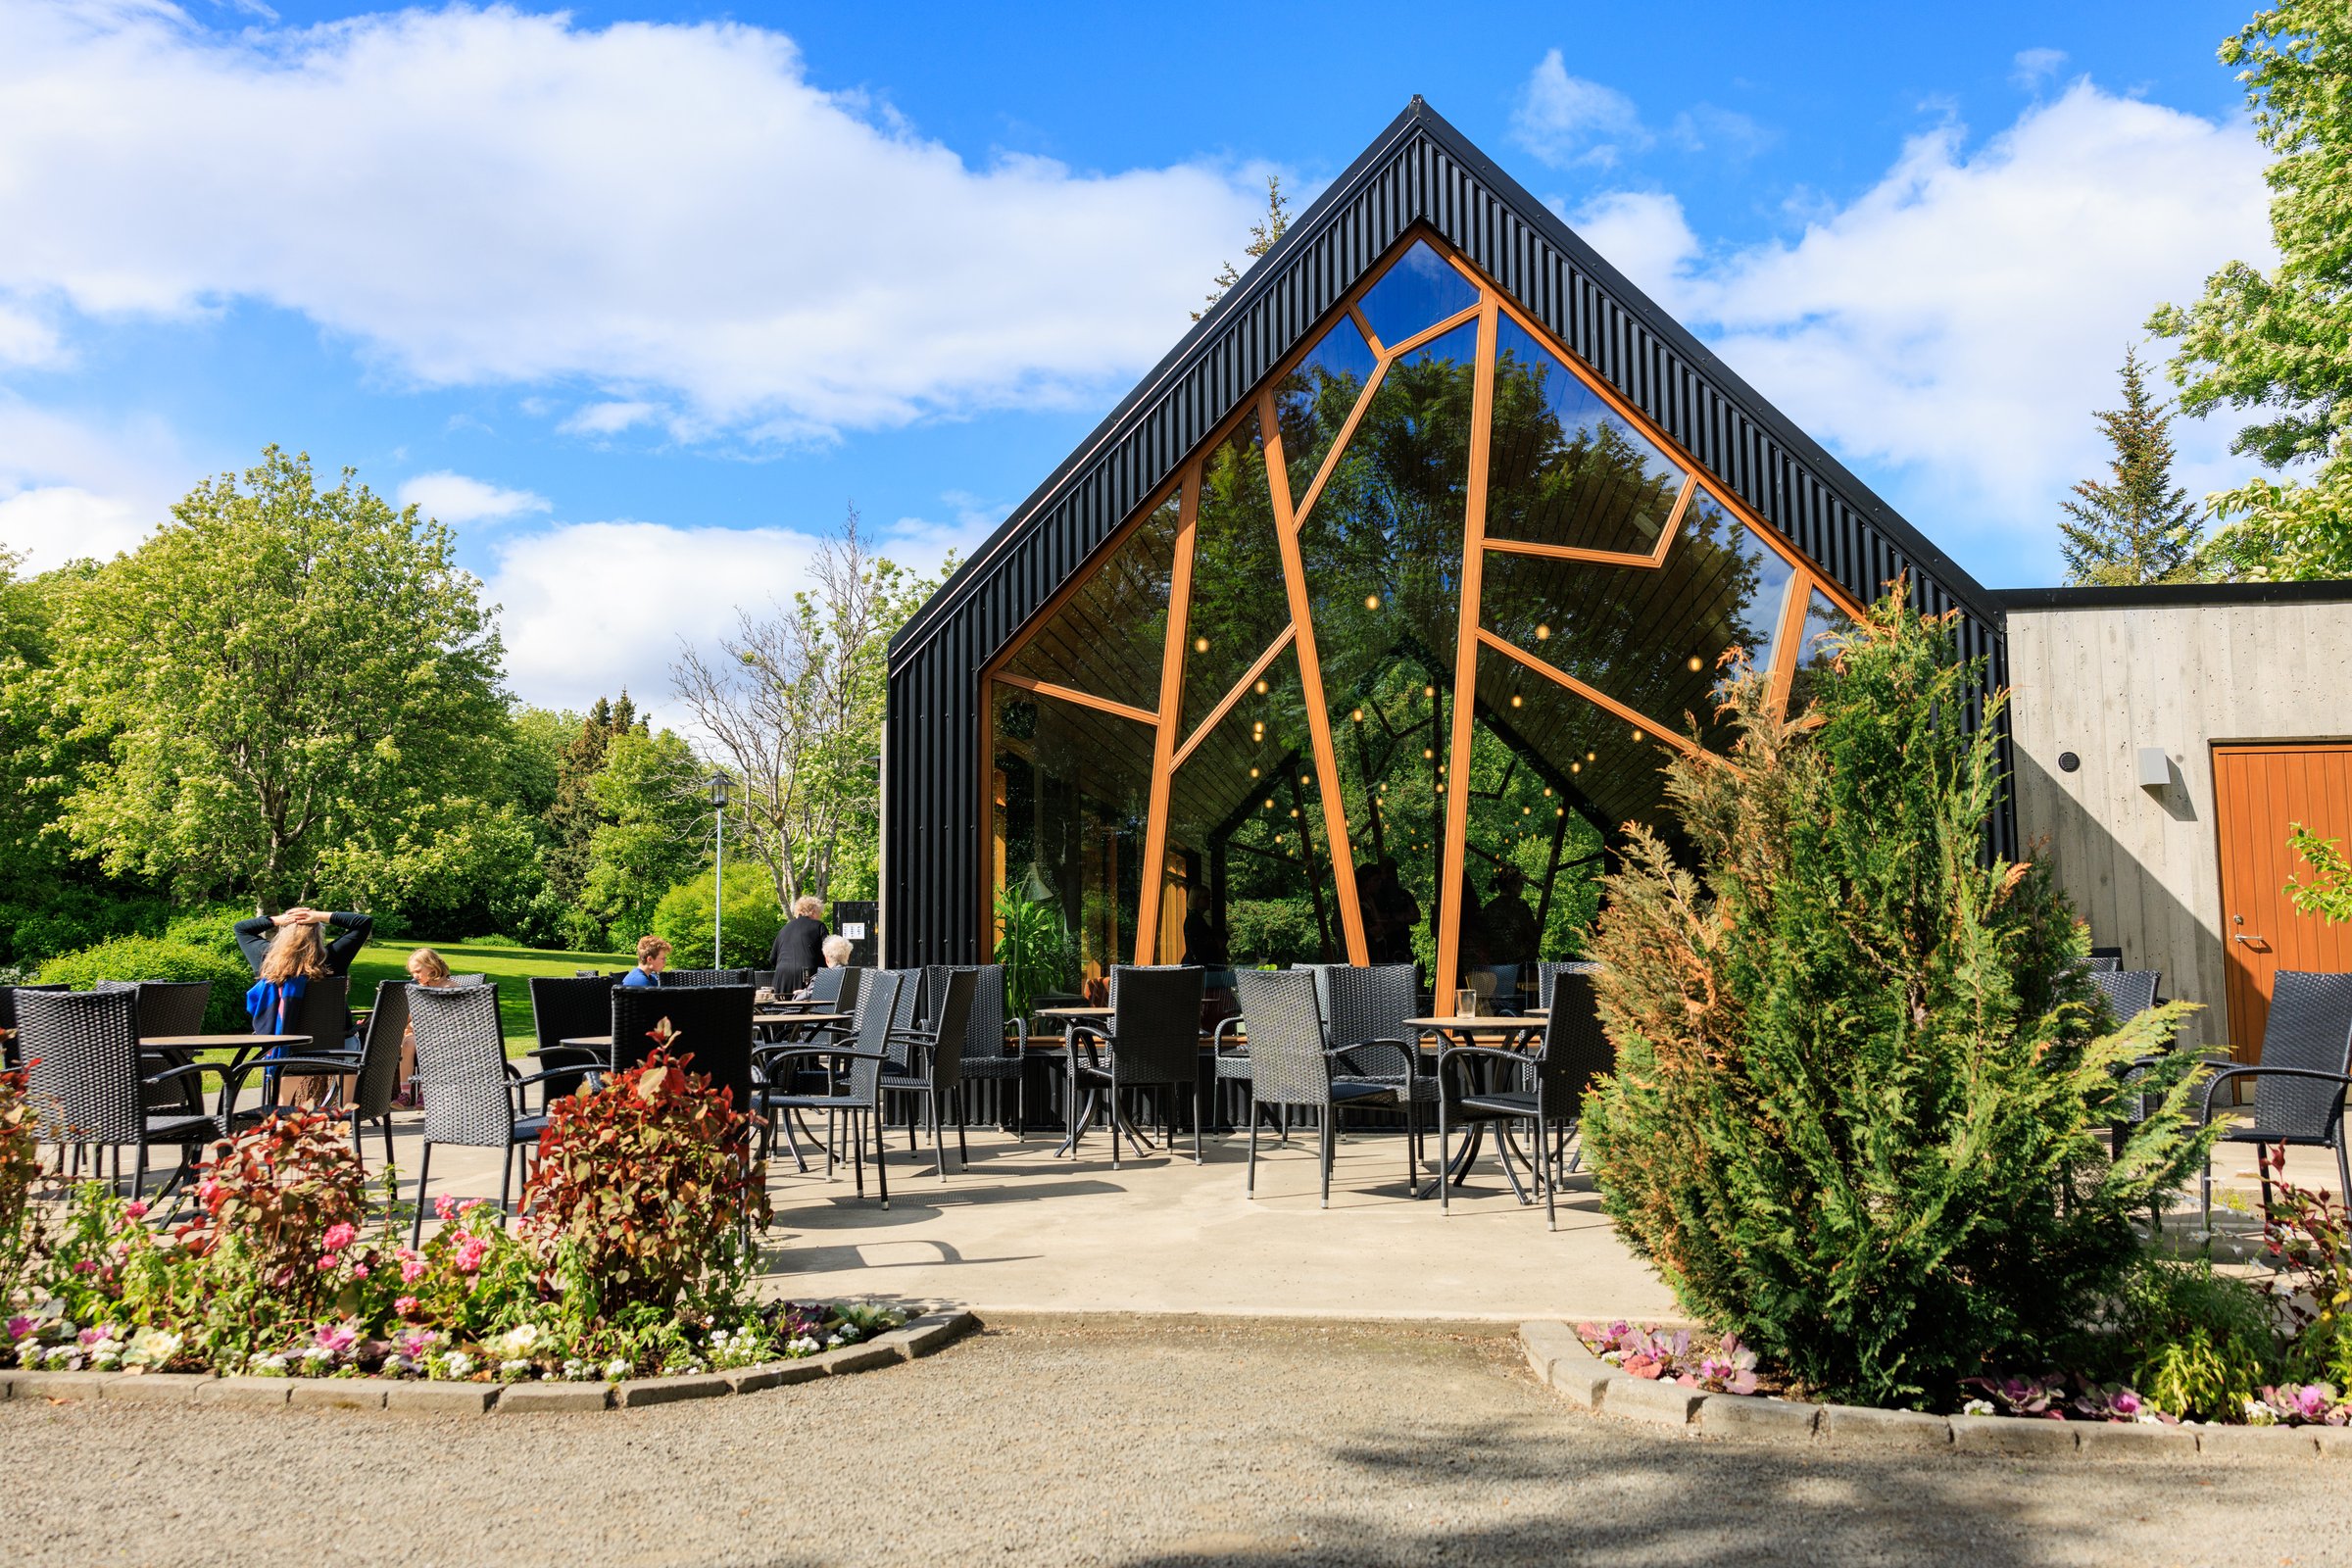 Outdoor tables surround Lyst cafe in the Akureyri Bothanic Garden